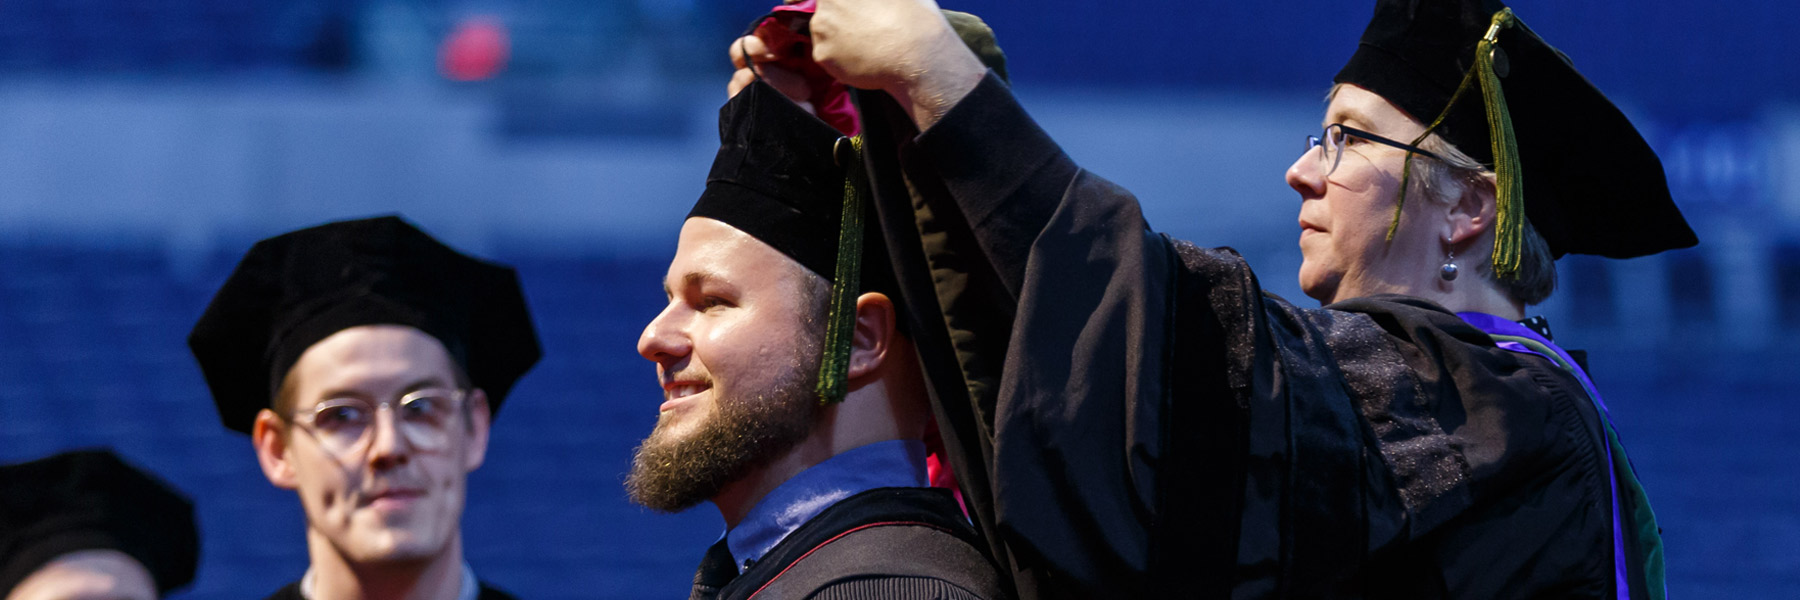 A dramatic blue-toned image of a middle-aged female professor hooding a smiling, bearded young male student at commencement.